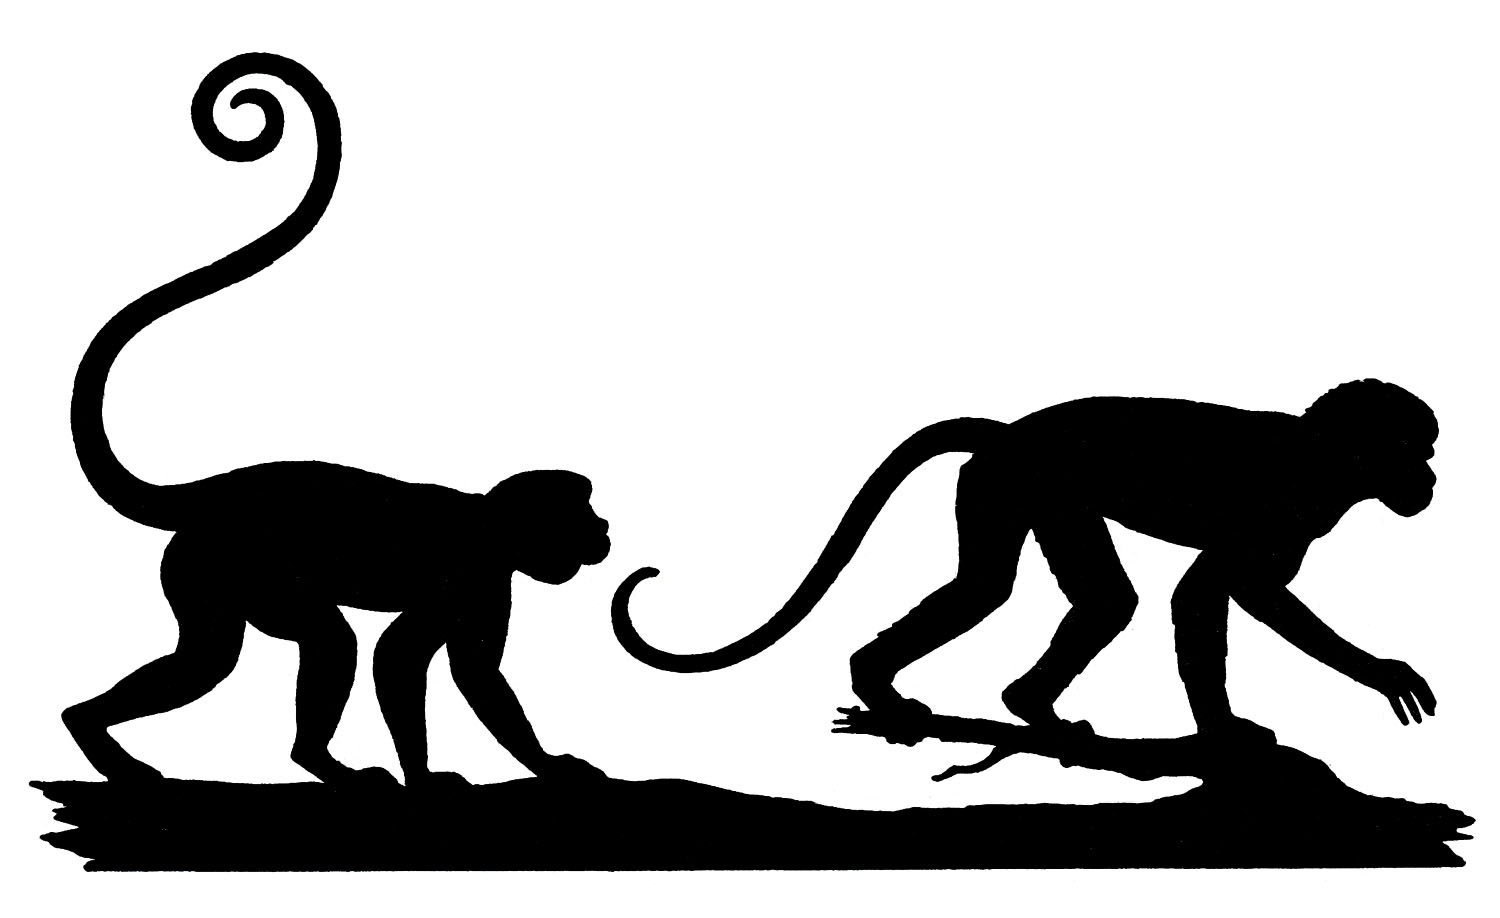 Download Vintage Silhouette Image - Monkeys - The Graphics Fairy